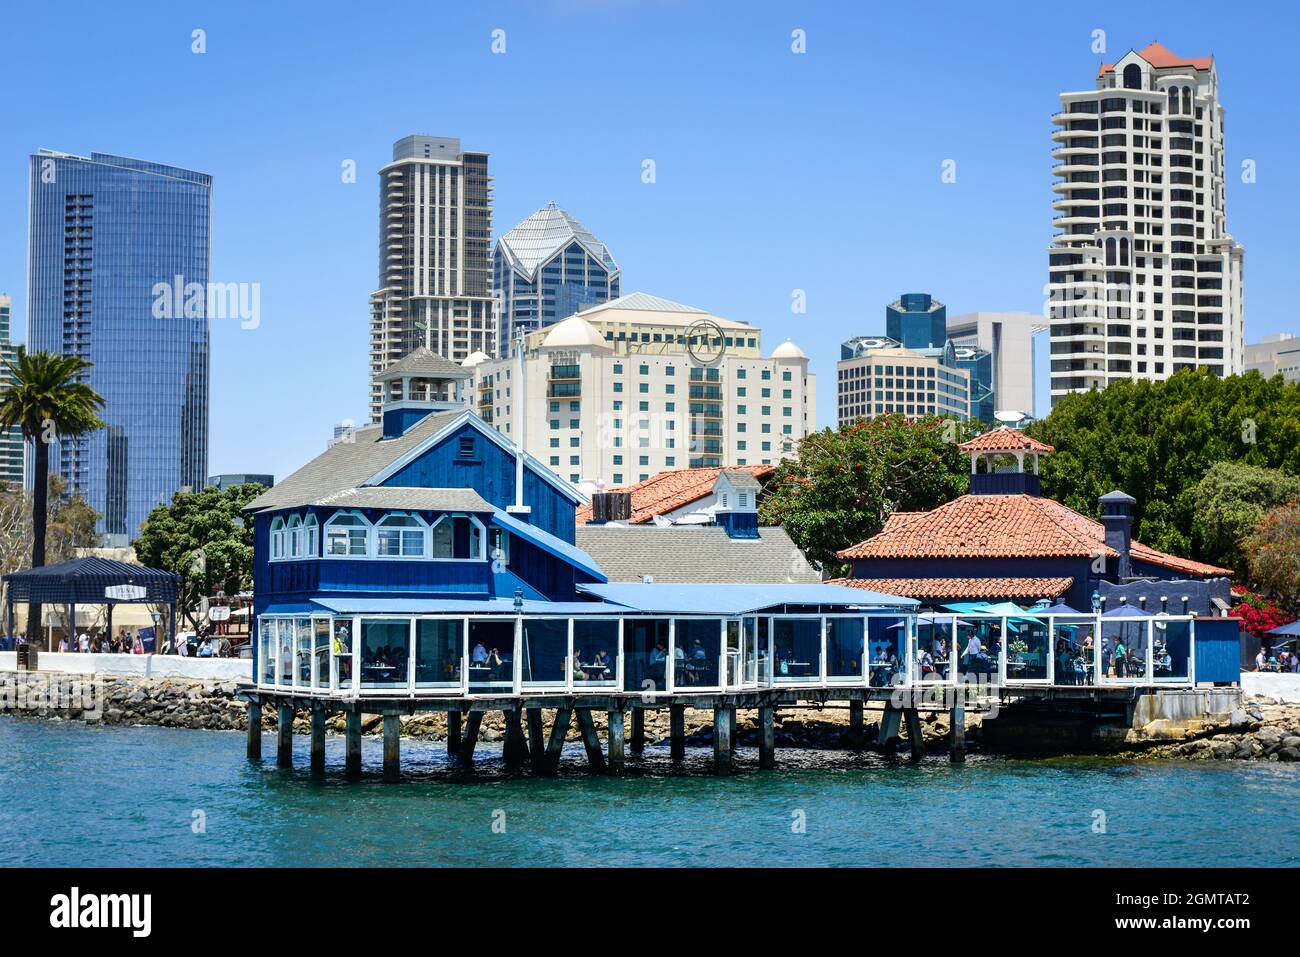 The San Diego Pier restaurant in blue and white retro style on stilts in Seaport Village, with looming high-rise buildings on bay of San Diego, CA Stock Photo